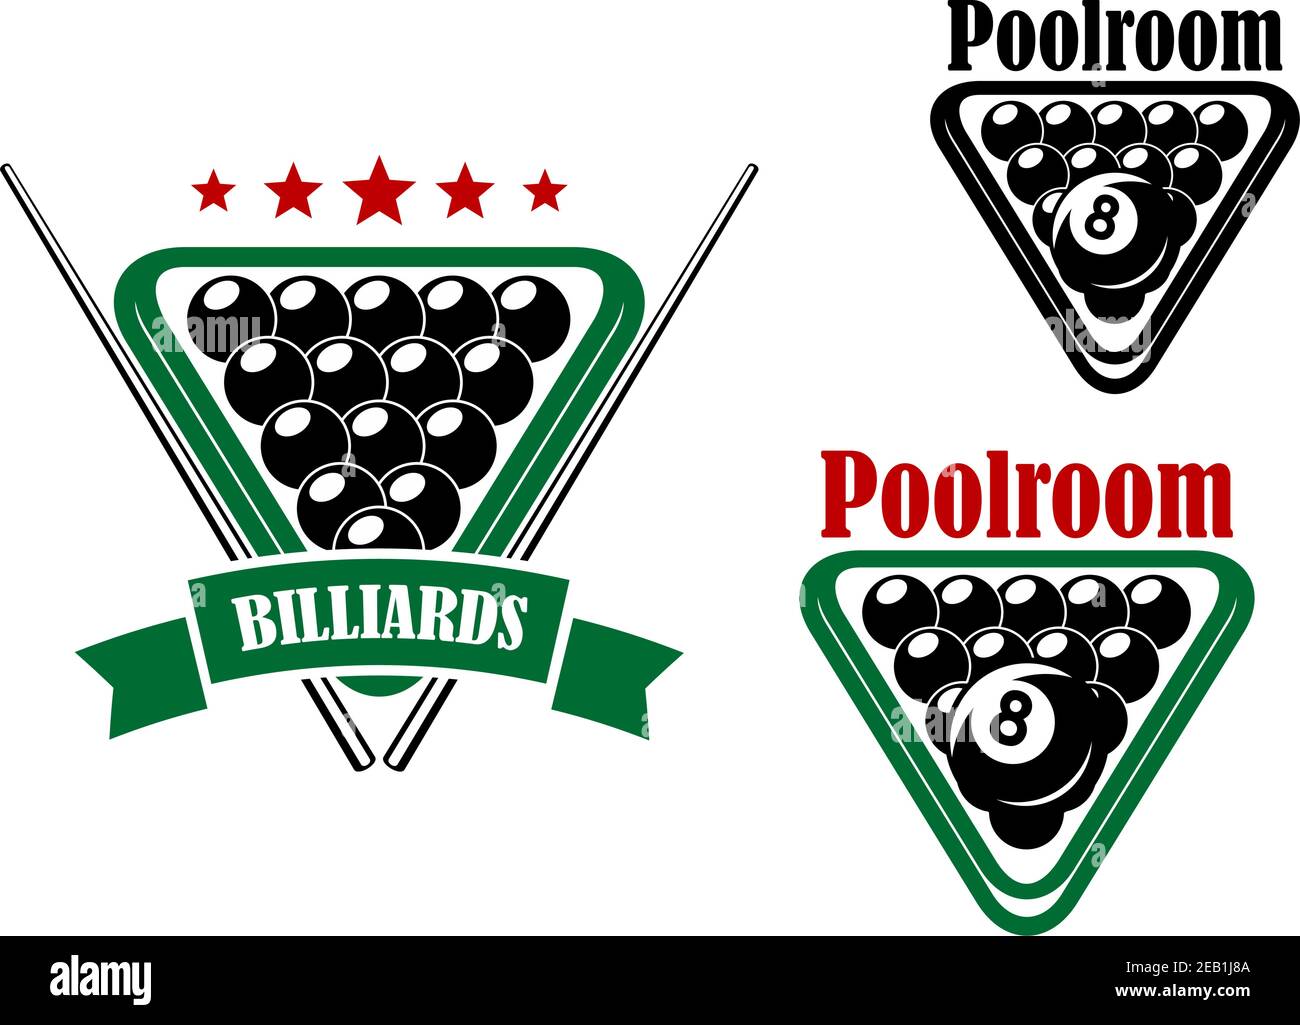 Billiard or poolroom emblem with black balls and cues isolated on white Stock Vector